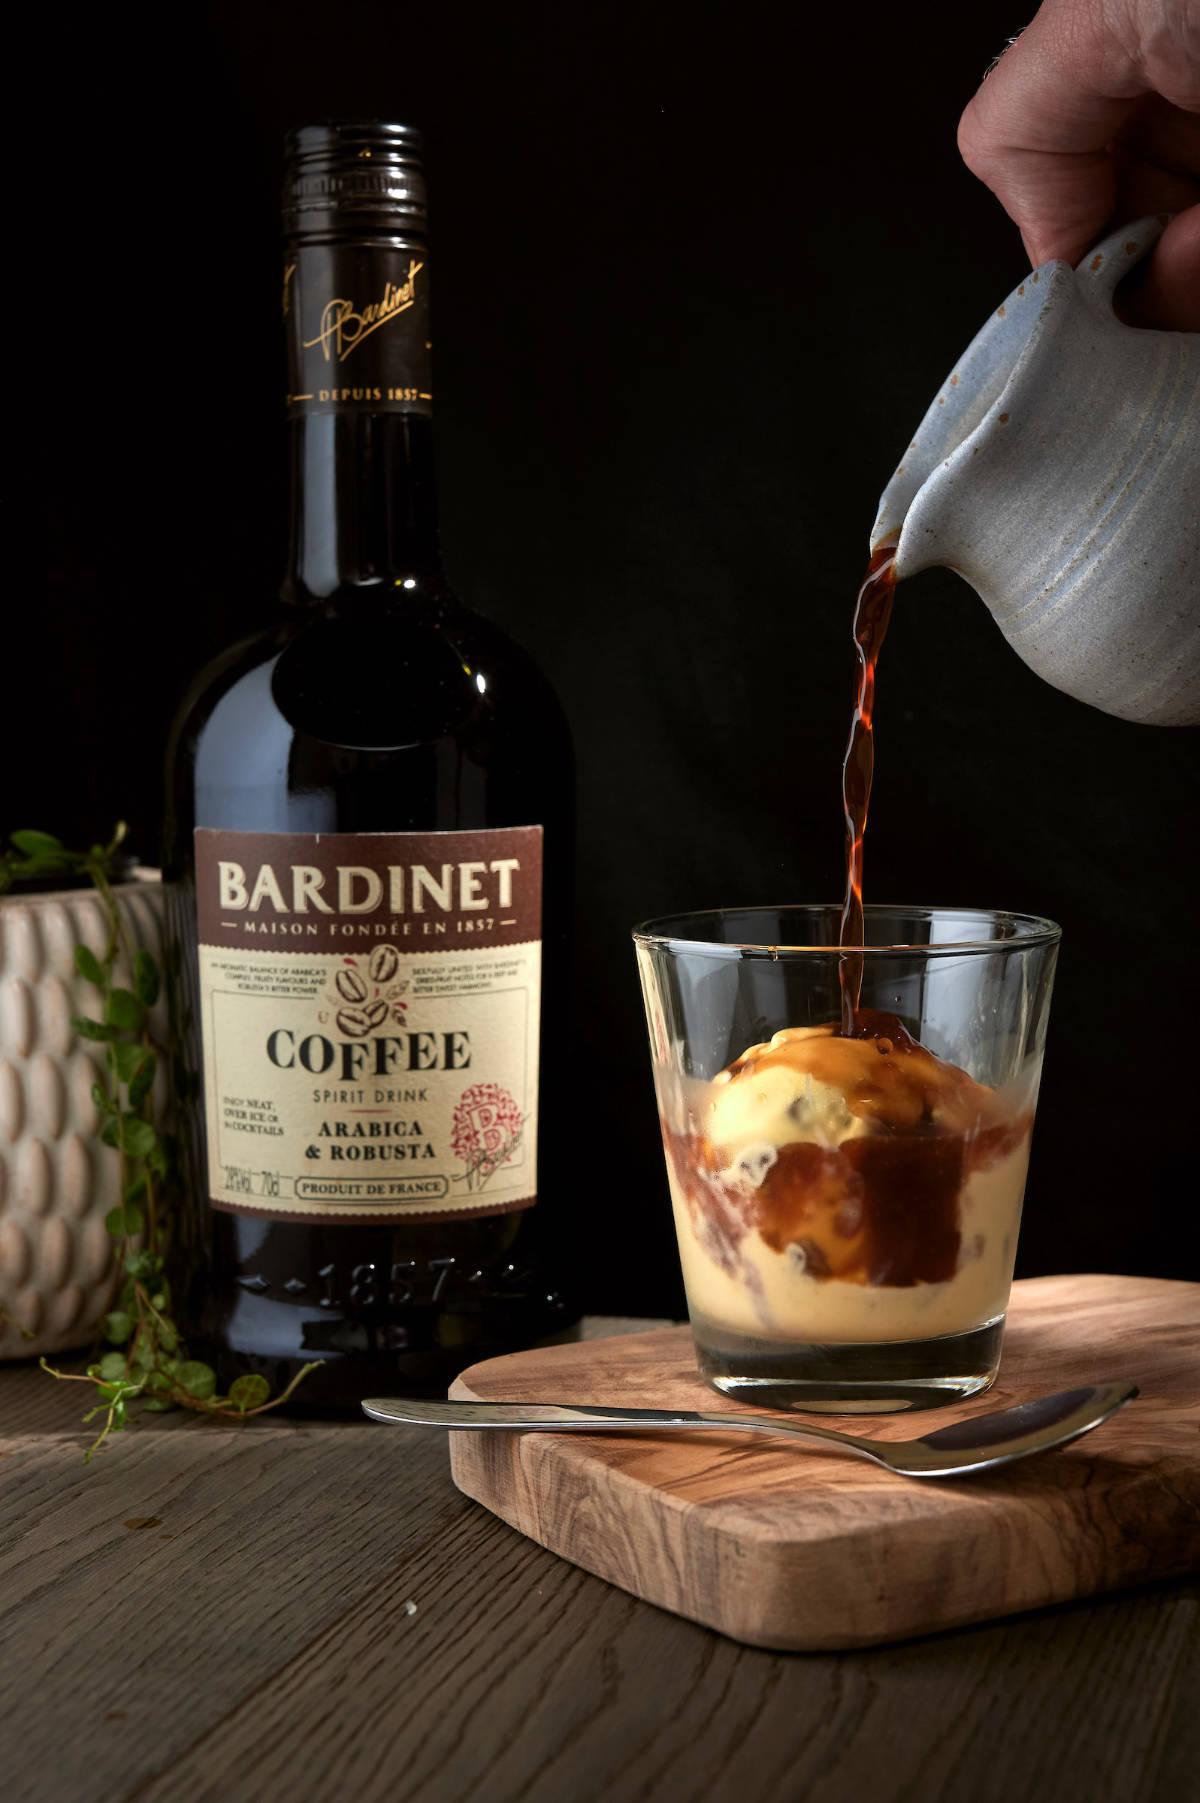 Bardinet Coffee Bardinet is celebrating the UK launch of its new coffee flavoured brandy today (Wednesday 11th May) by unveiling a series of cocktails they hope will inspire drinkers to be their own ‘brandy barista’ at home. Bardinet Coffee is the first release from the brand’s new ‘Flavours Collection’ and combines Bardinet brandy with the delicious natural flavours of Arabica and Robusta coffee. .